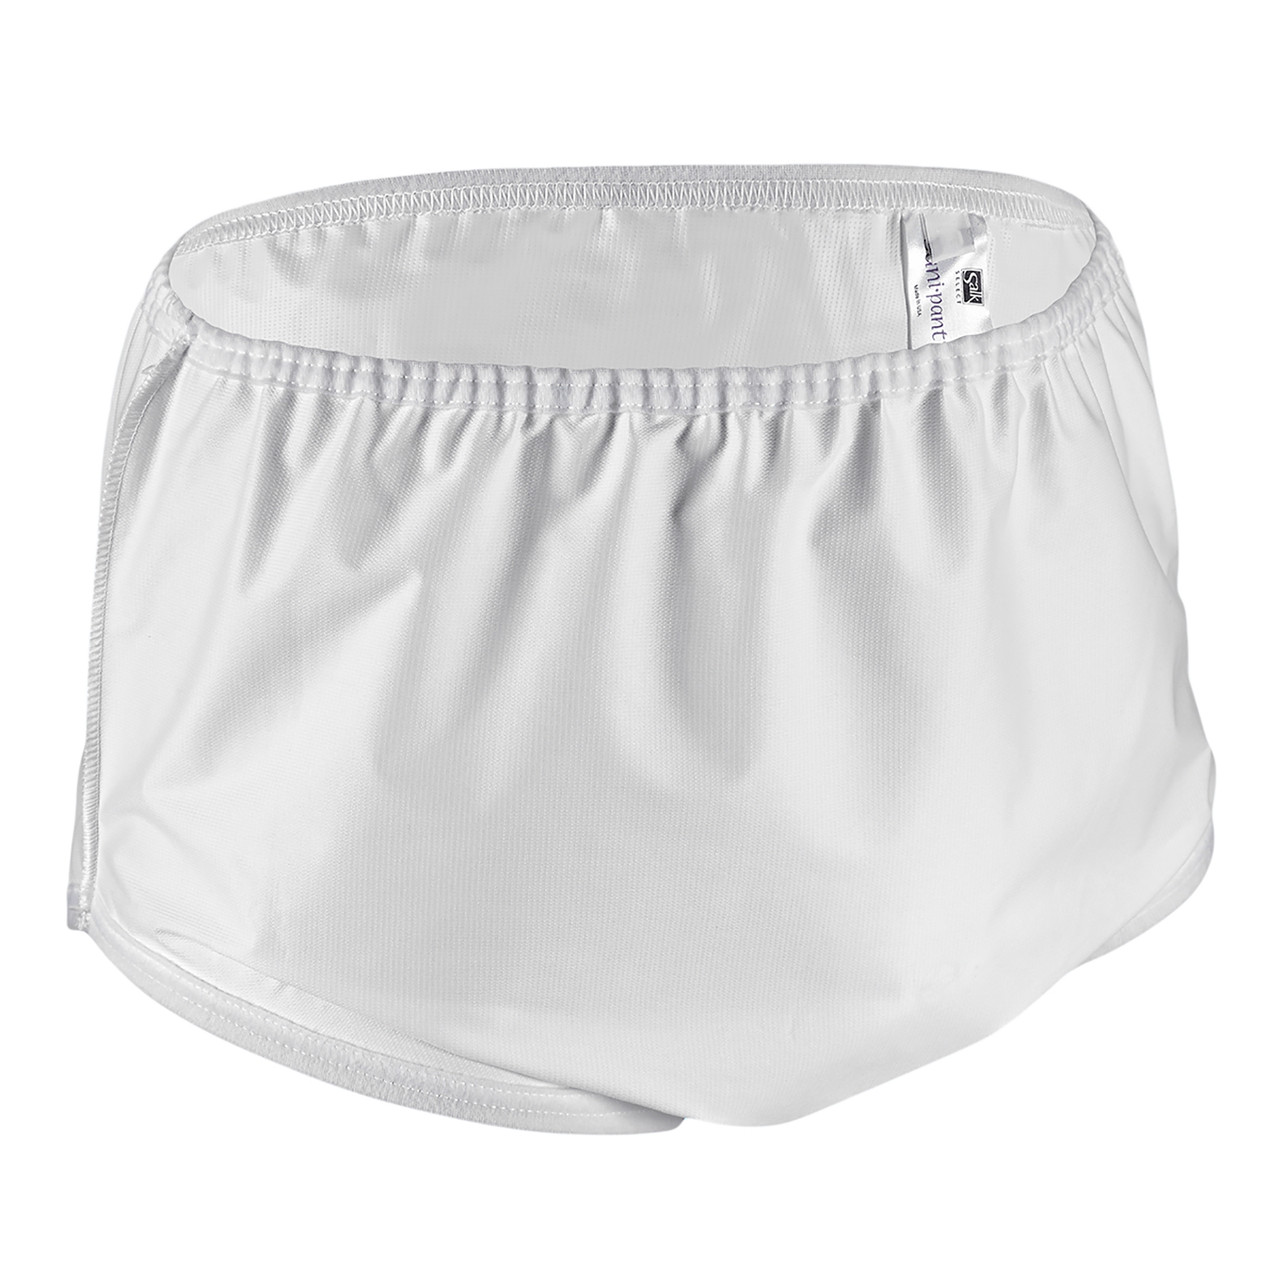 Adult Incontinence Pull-on Plastic Pants/Pull-on Diapers/Leak-Proof  Incontinence Underwear/Waterproof Adult Diaper Covers/Washable Men's and  Women's